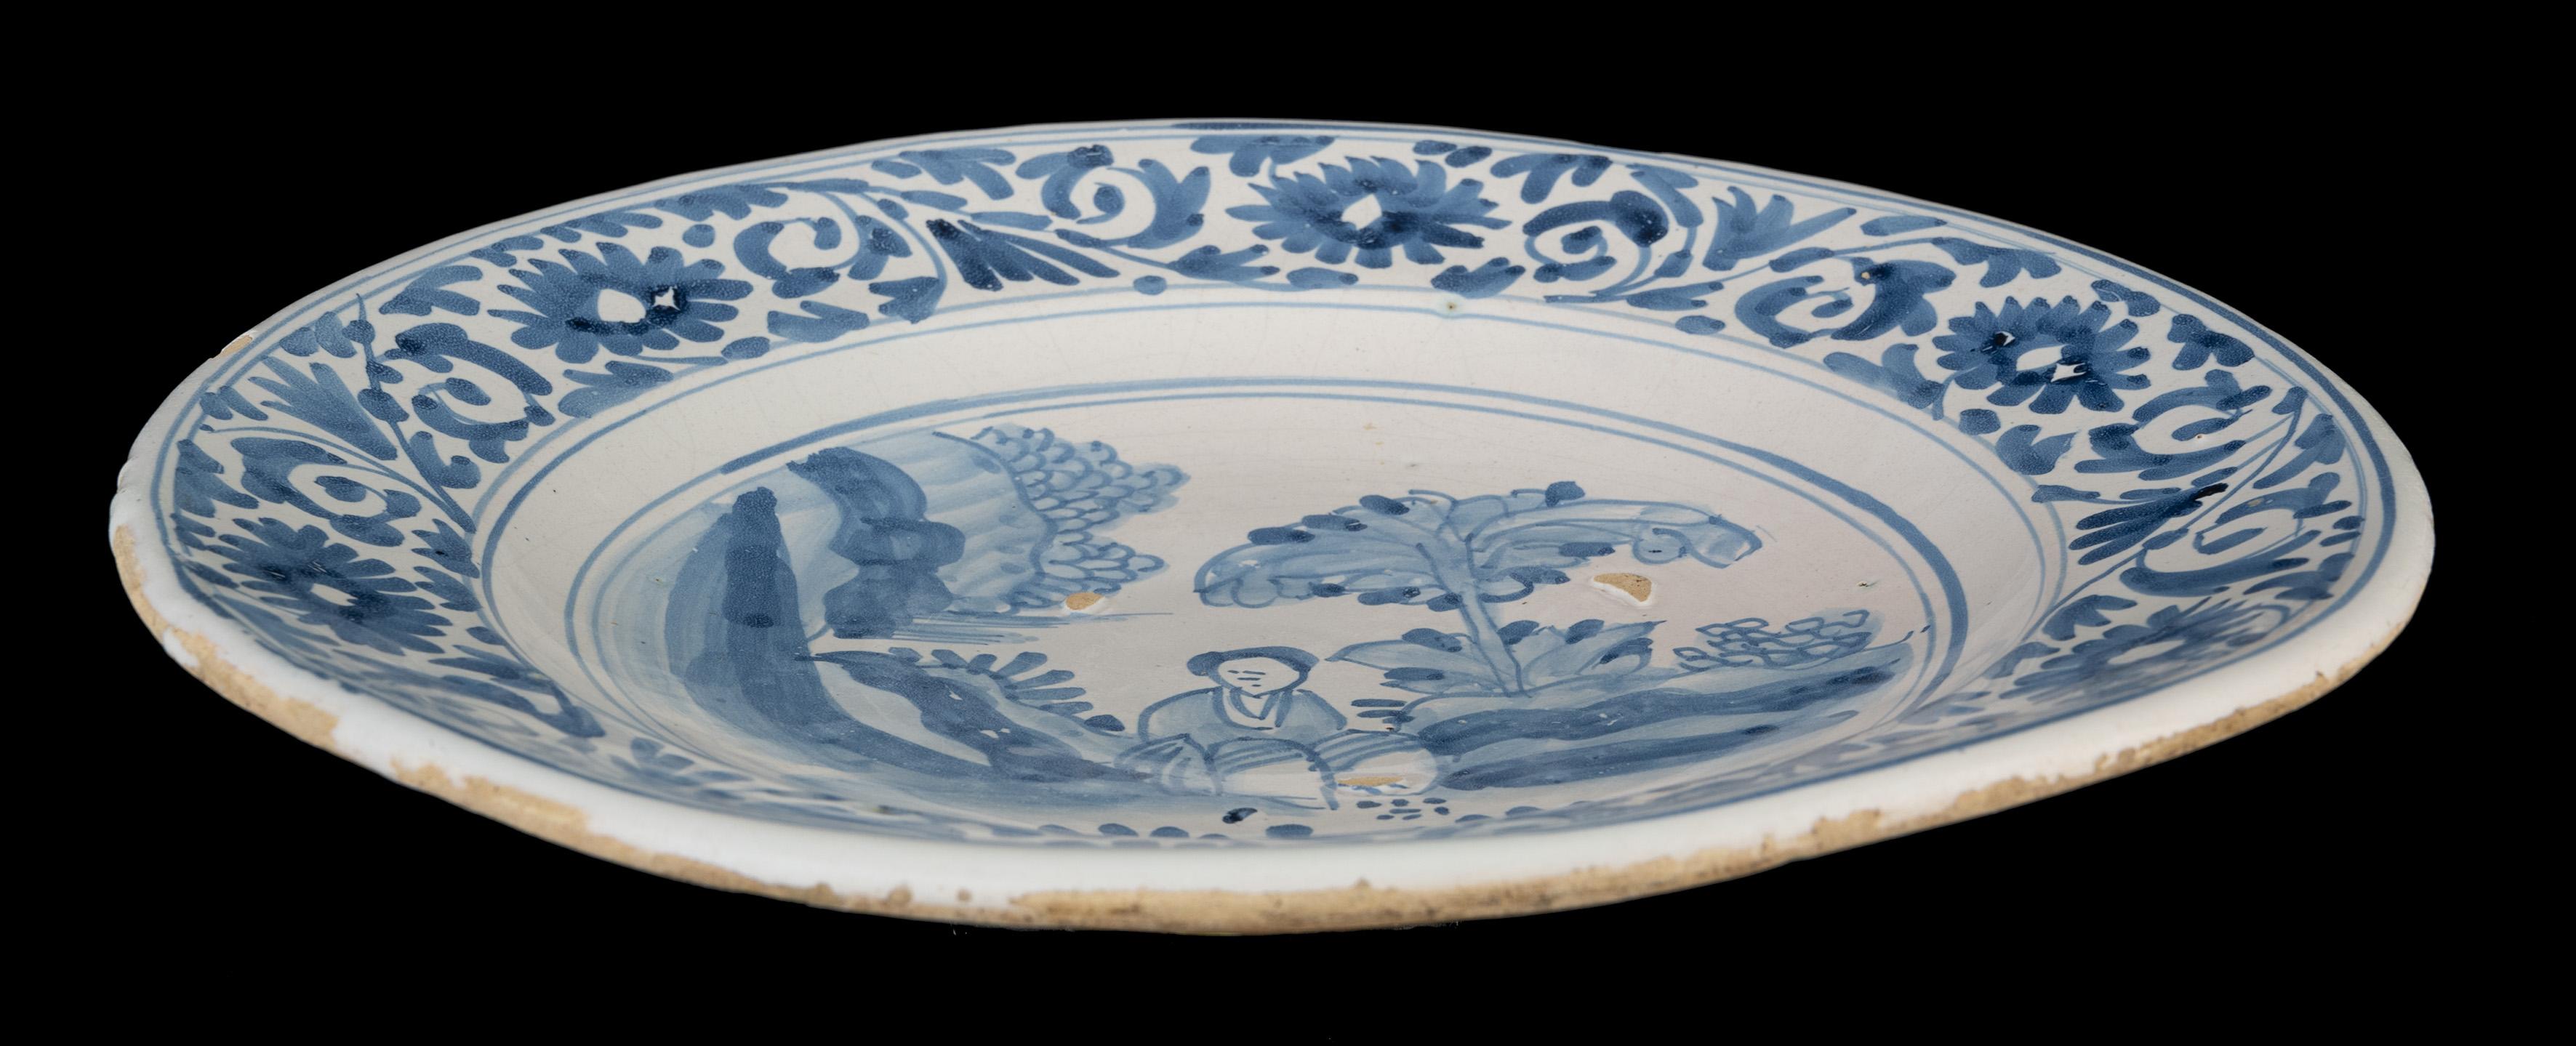 Glazed Delft Blue and White Chinoiserie Dish the Netherlands, 1675-1700 Chinoiserie For Sale